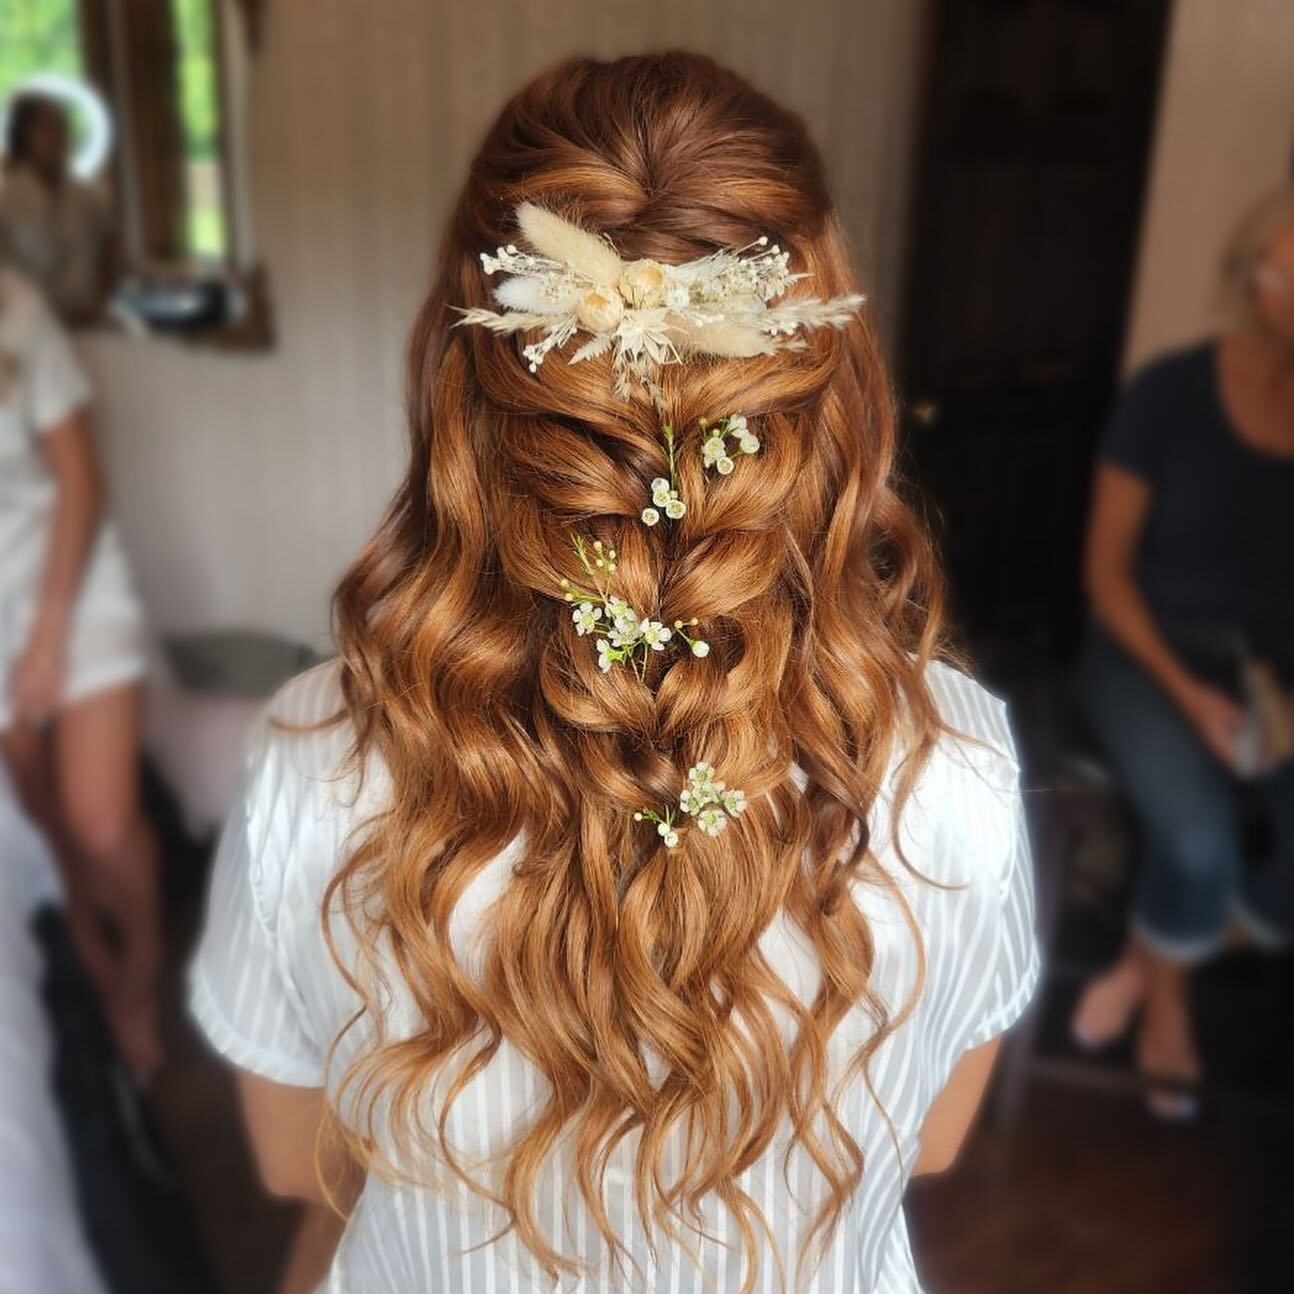 Boho bridal style 💛 Makeup and hair by our talented lead artist Lina!